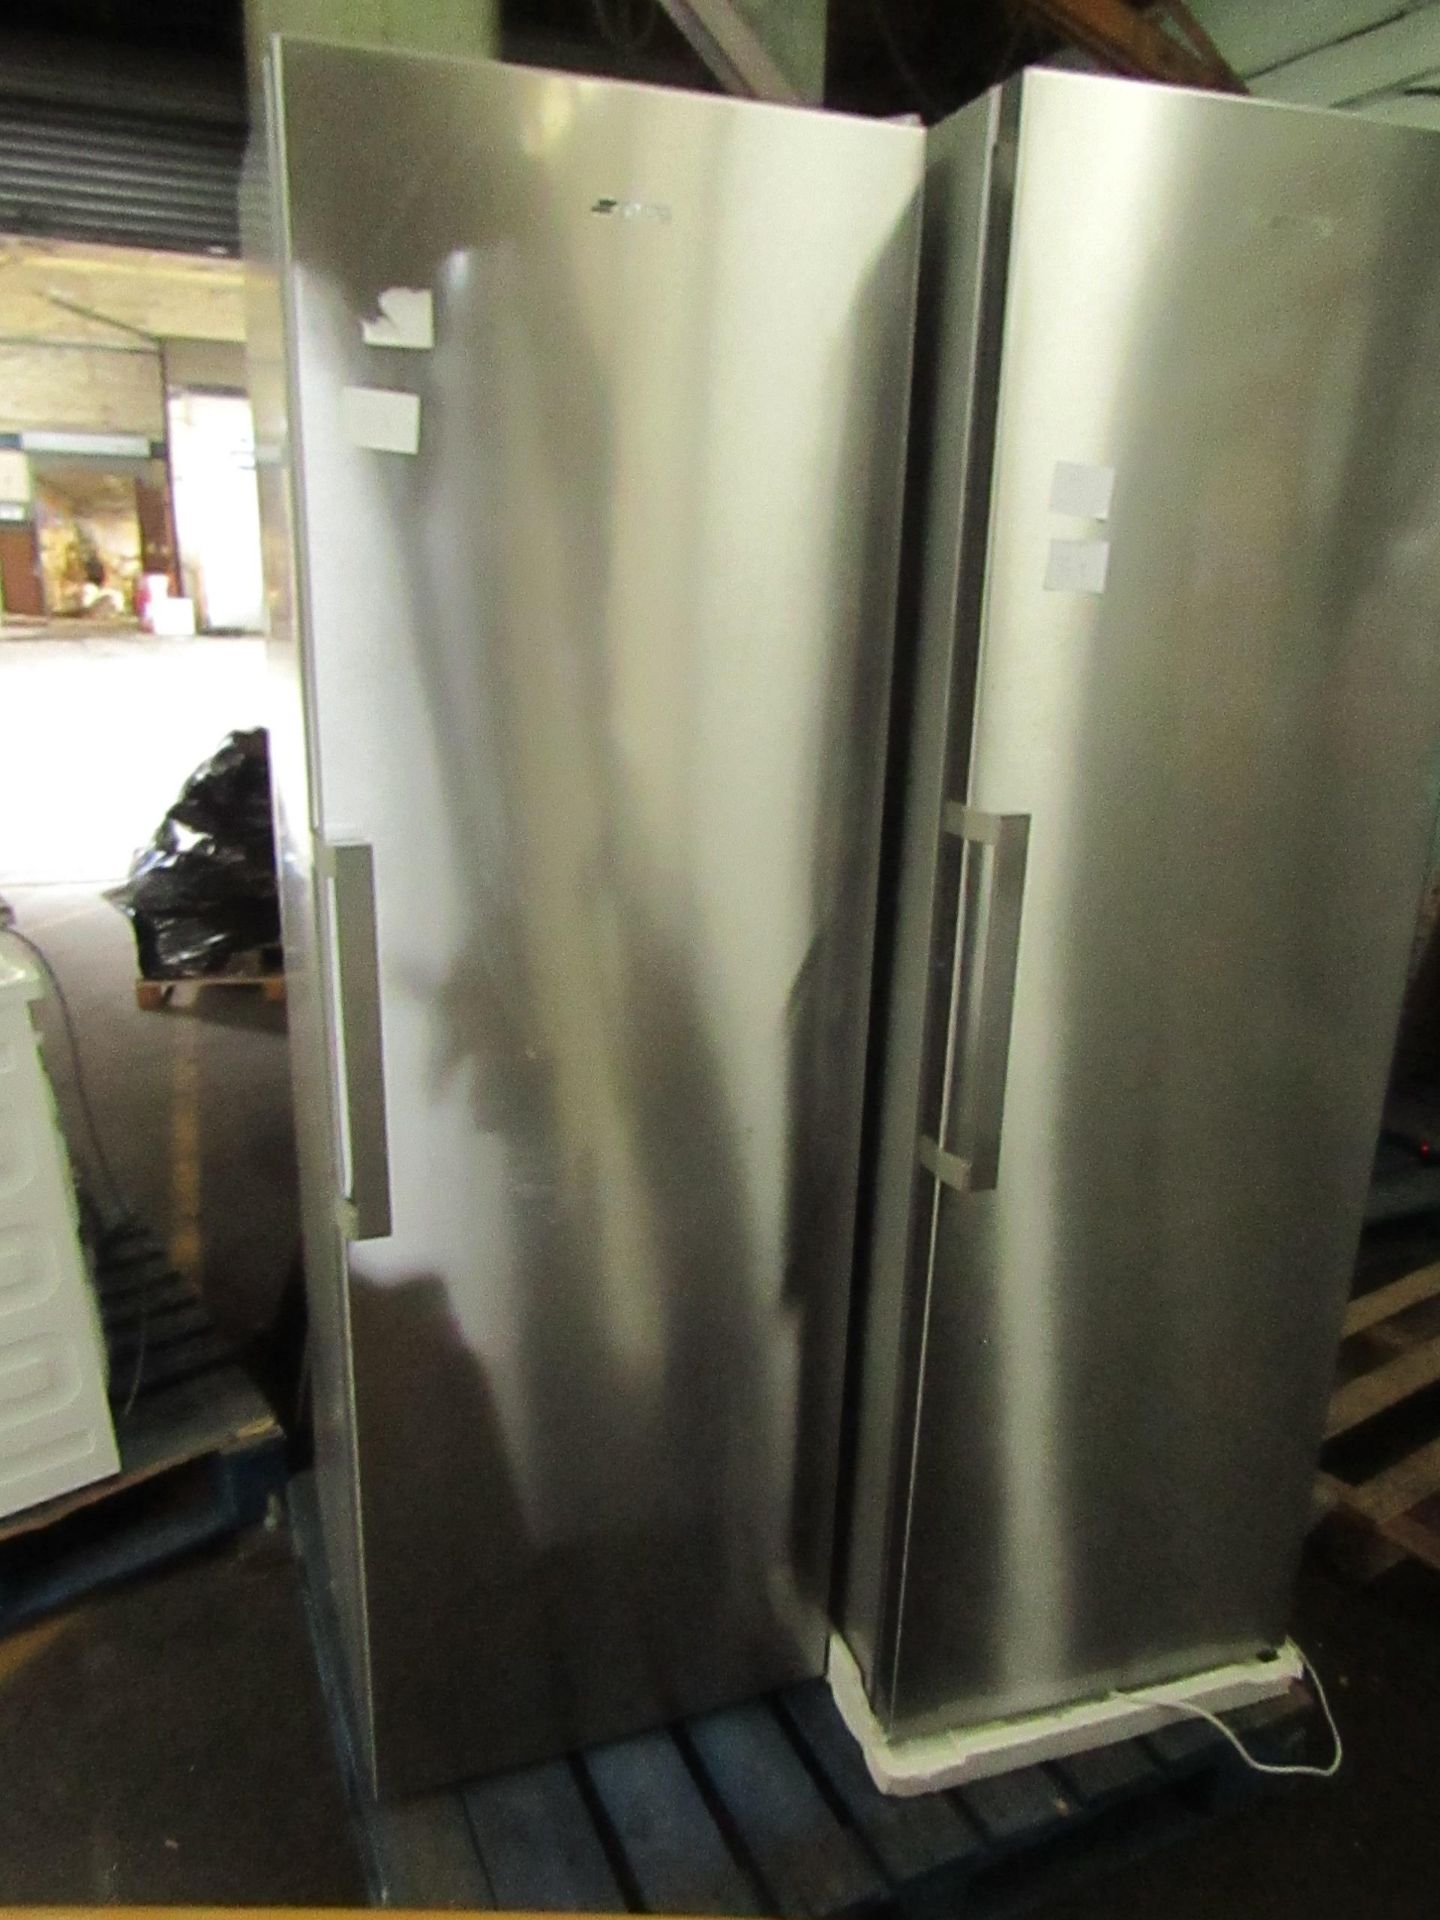 Smeg freestanding fridge, unchecked due to room temperature being too low.